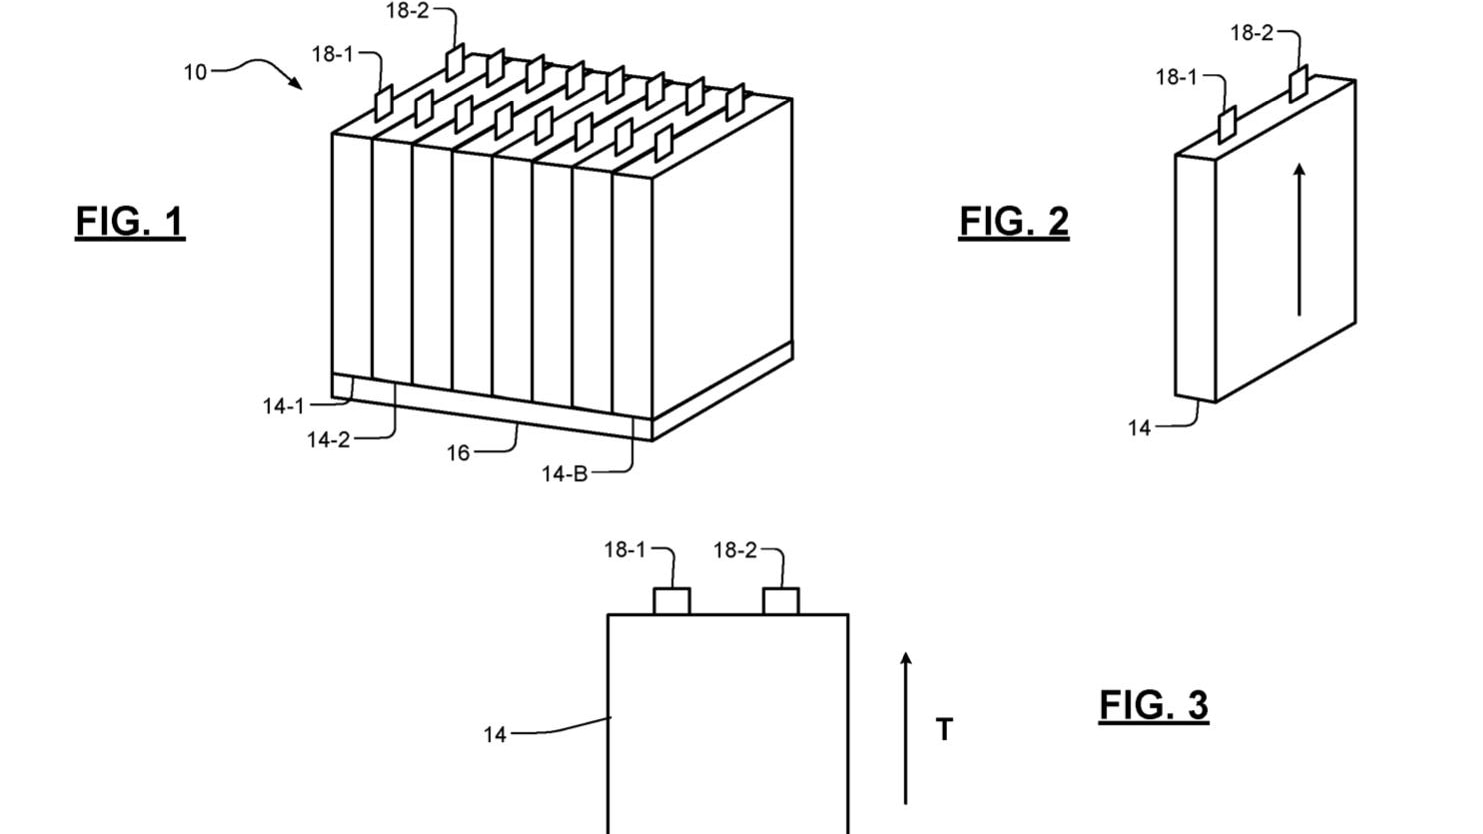 General Motors Lego-like battery cell patent image